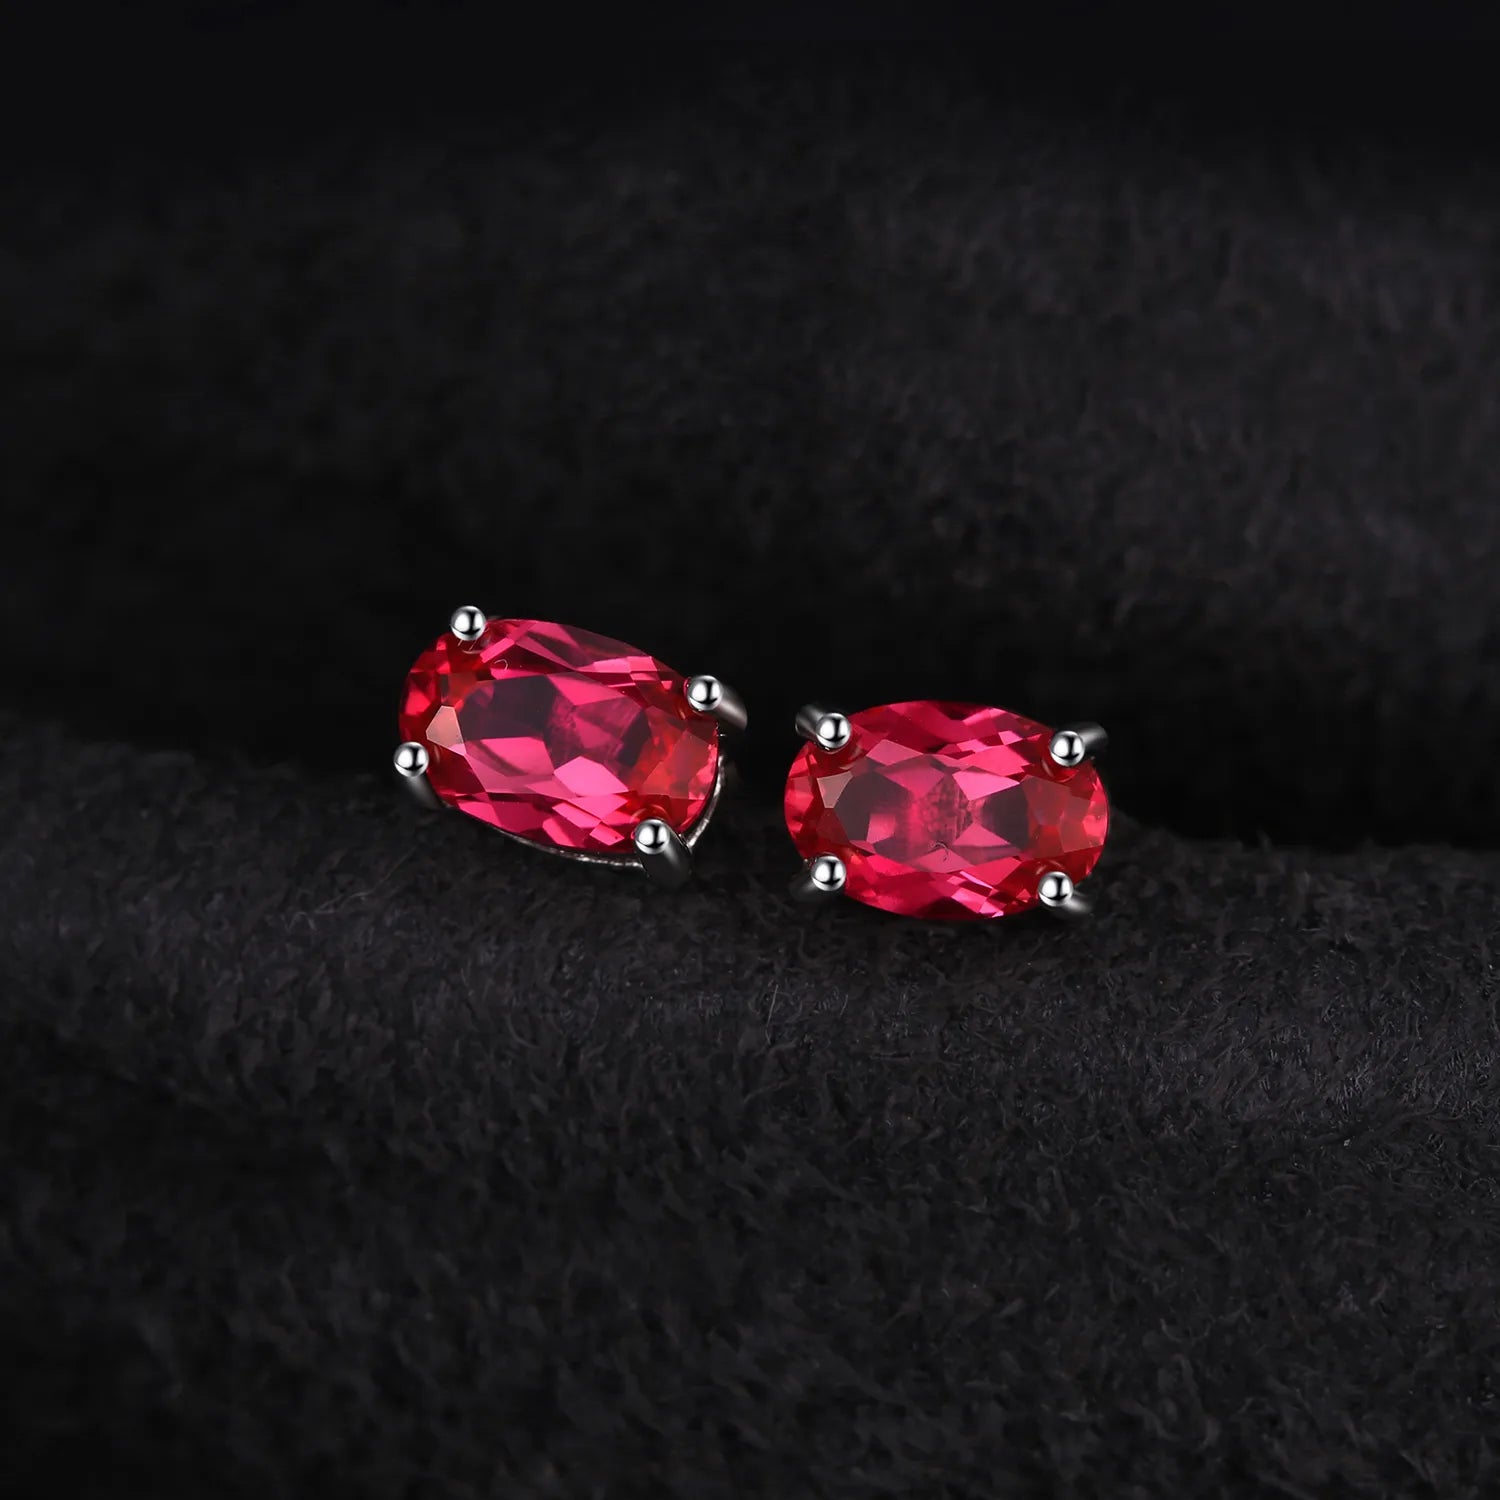 JewelryPalace Oval Cut Red Created Ruby 925 Sterling Silver Stud Earrings For Women Fashion Statement Jewelry Gemstone Earrings